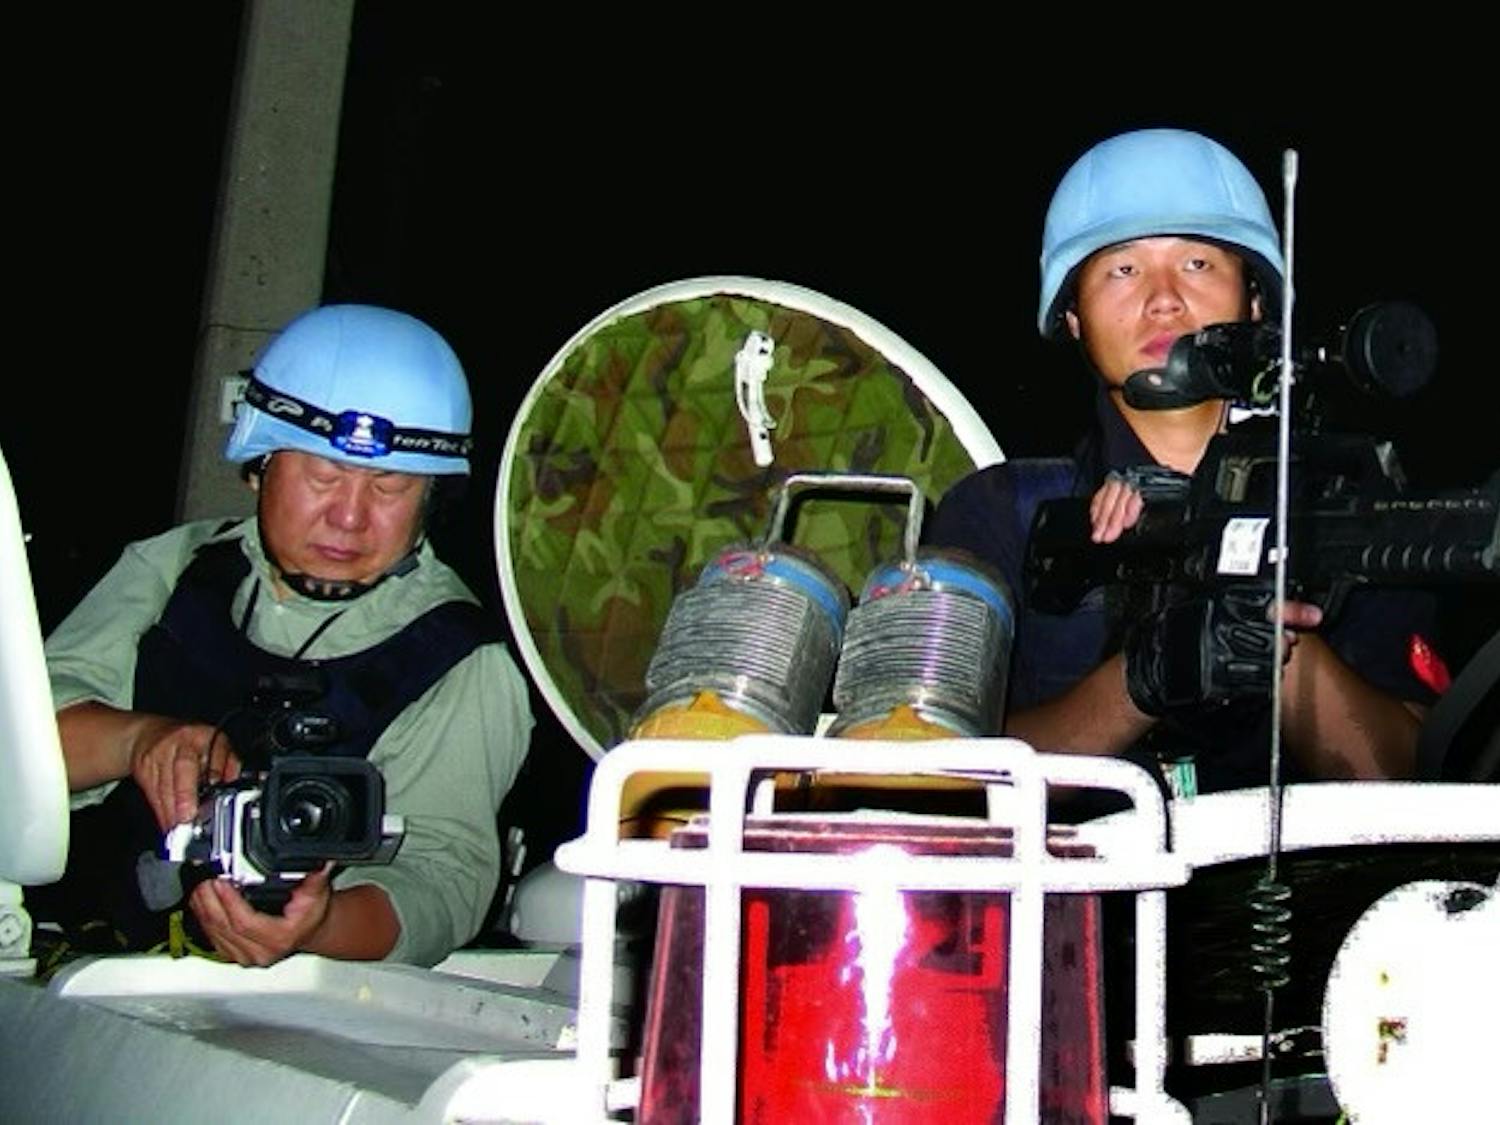 Mr. Yan Xiao, pictured in gear